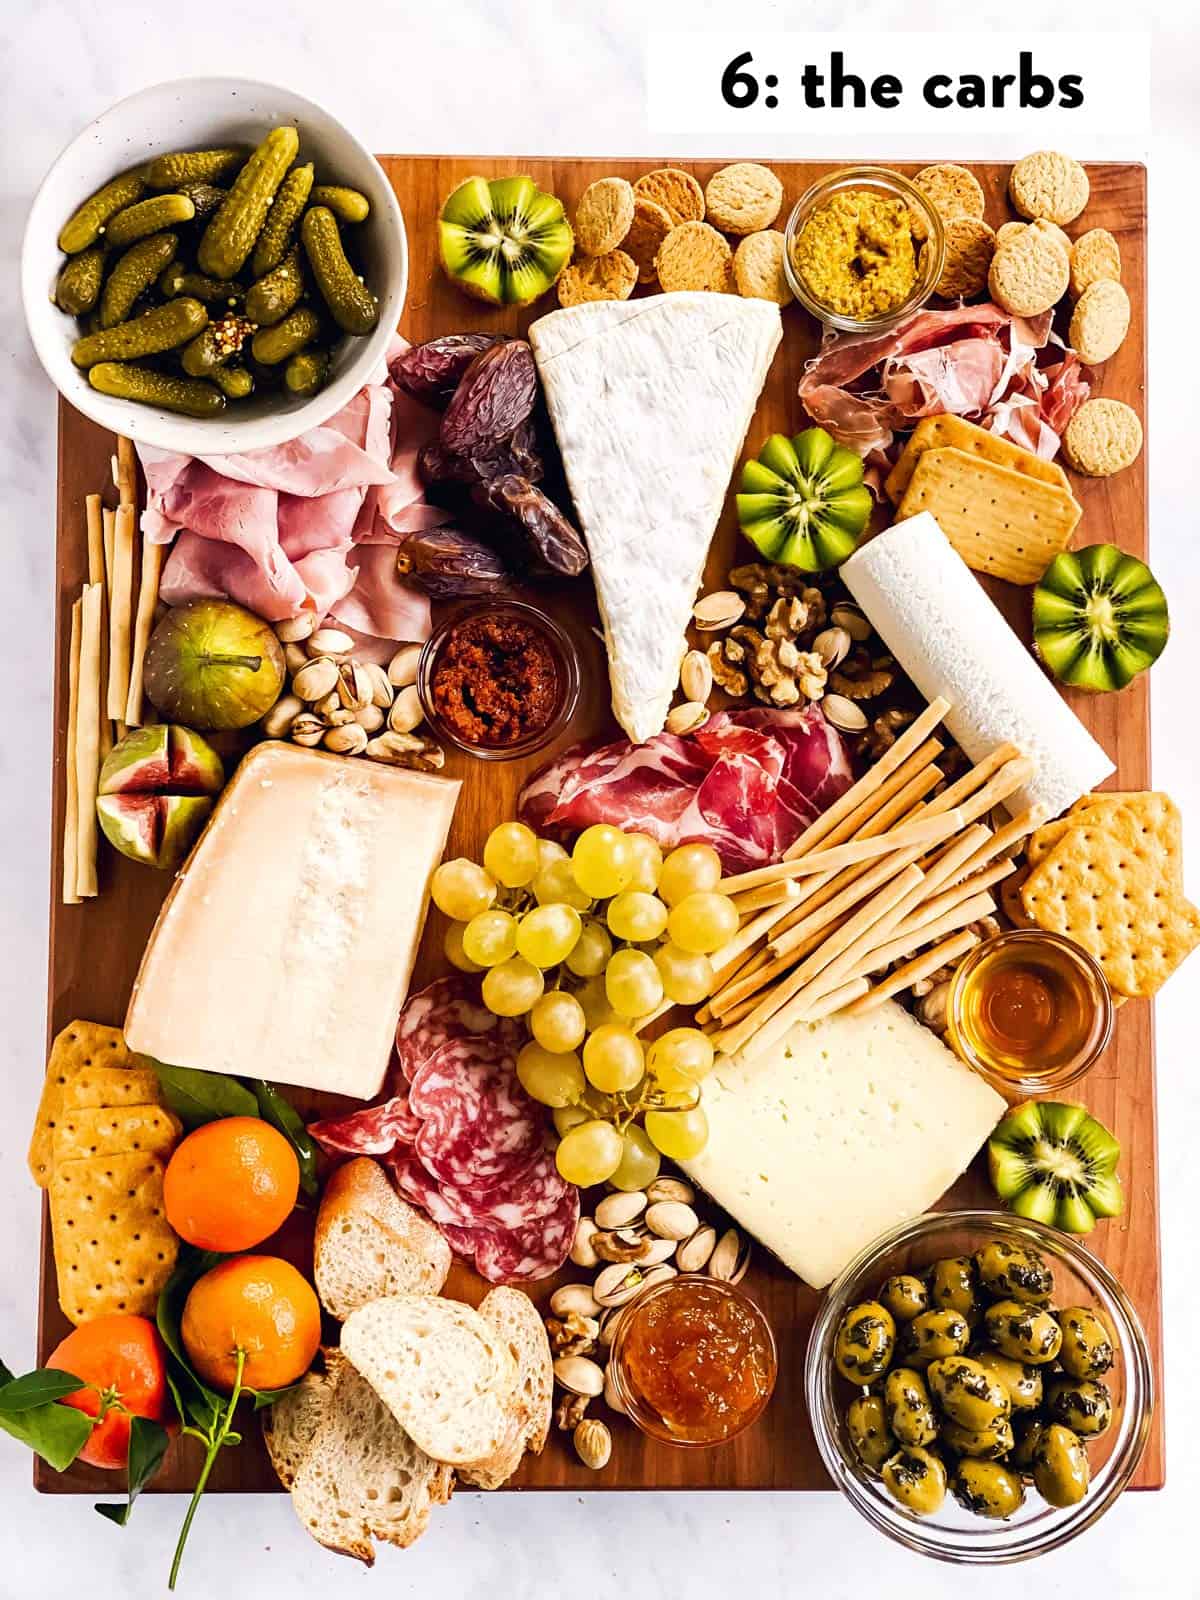 https://www.savorynothings.com/wp-content/uploads/2020/12/charcuterie-board-image-step-6.jpg